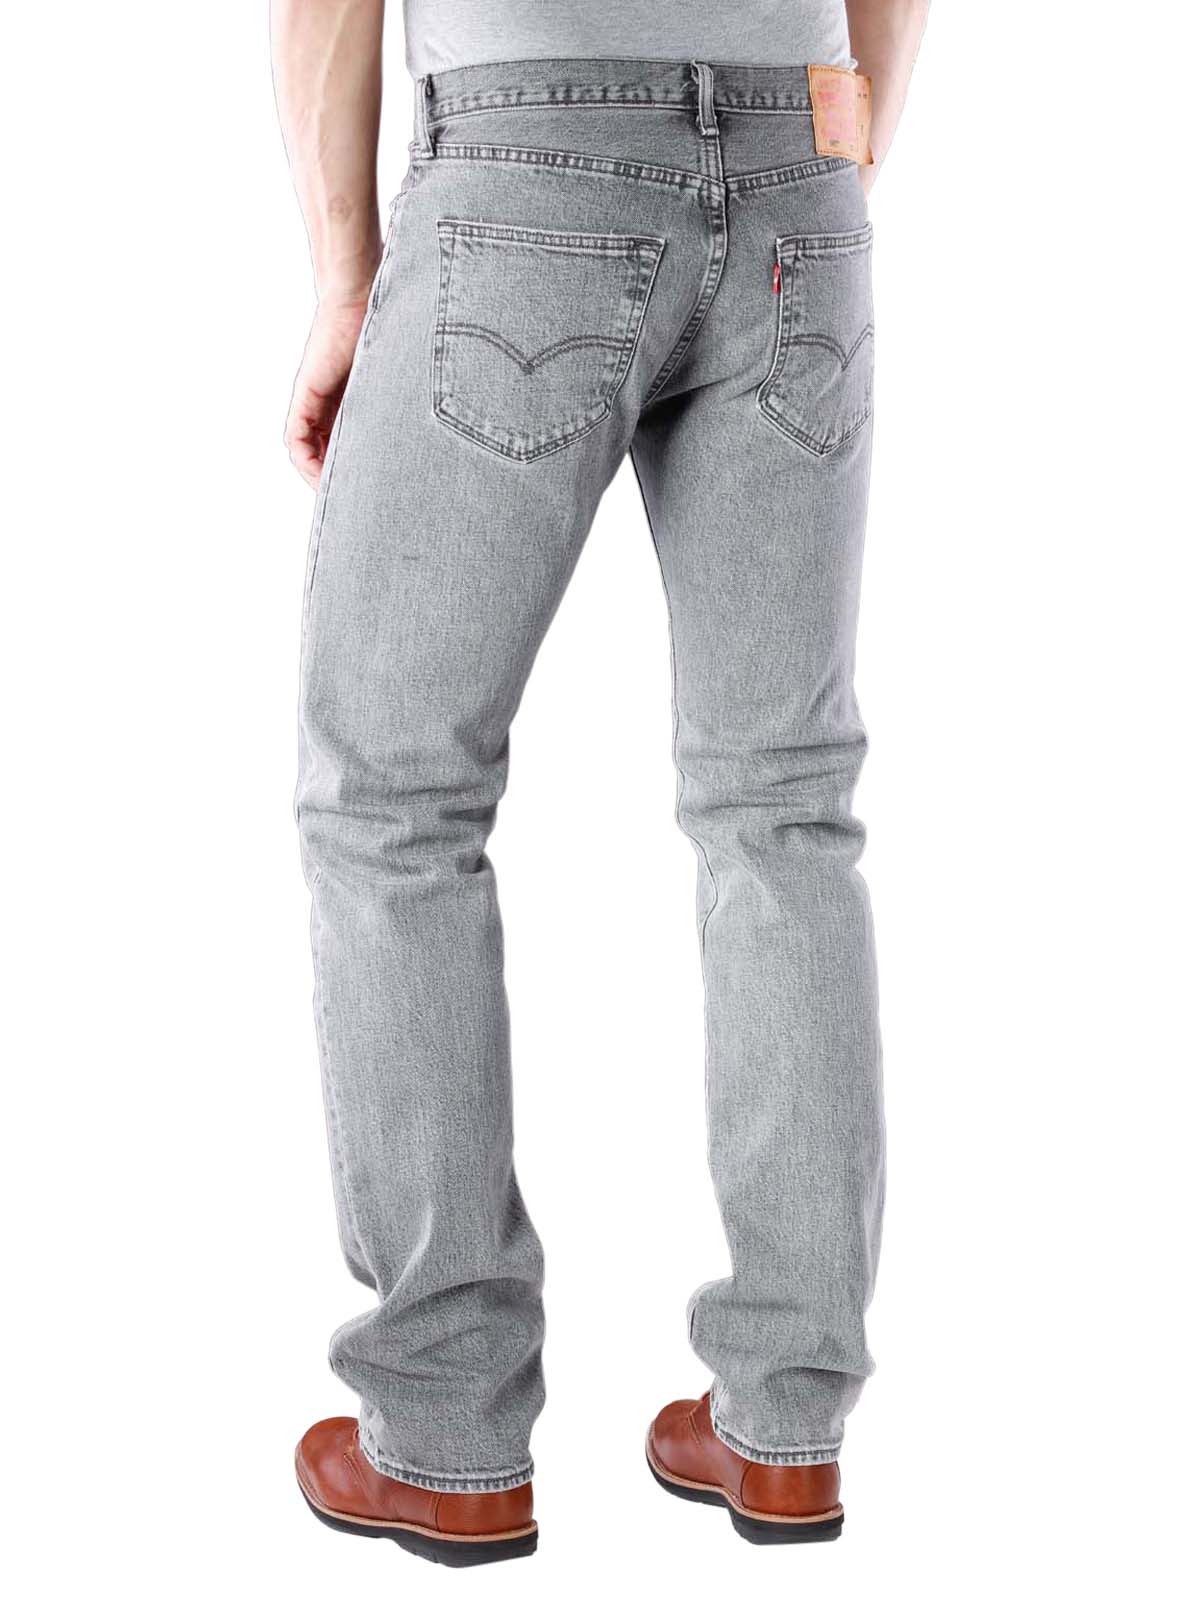 Levi's 501 Jeans direnzo stretch Levi's Men's Jeans | Free Shipping on   - SIMPLY LOOK GOOD